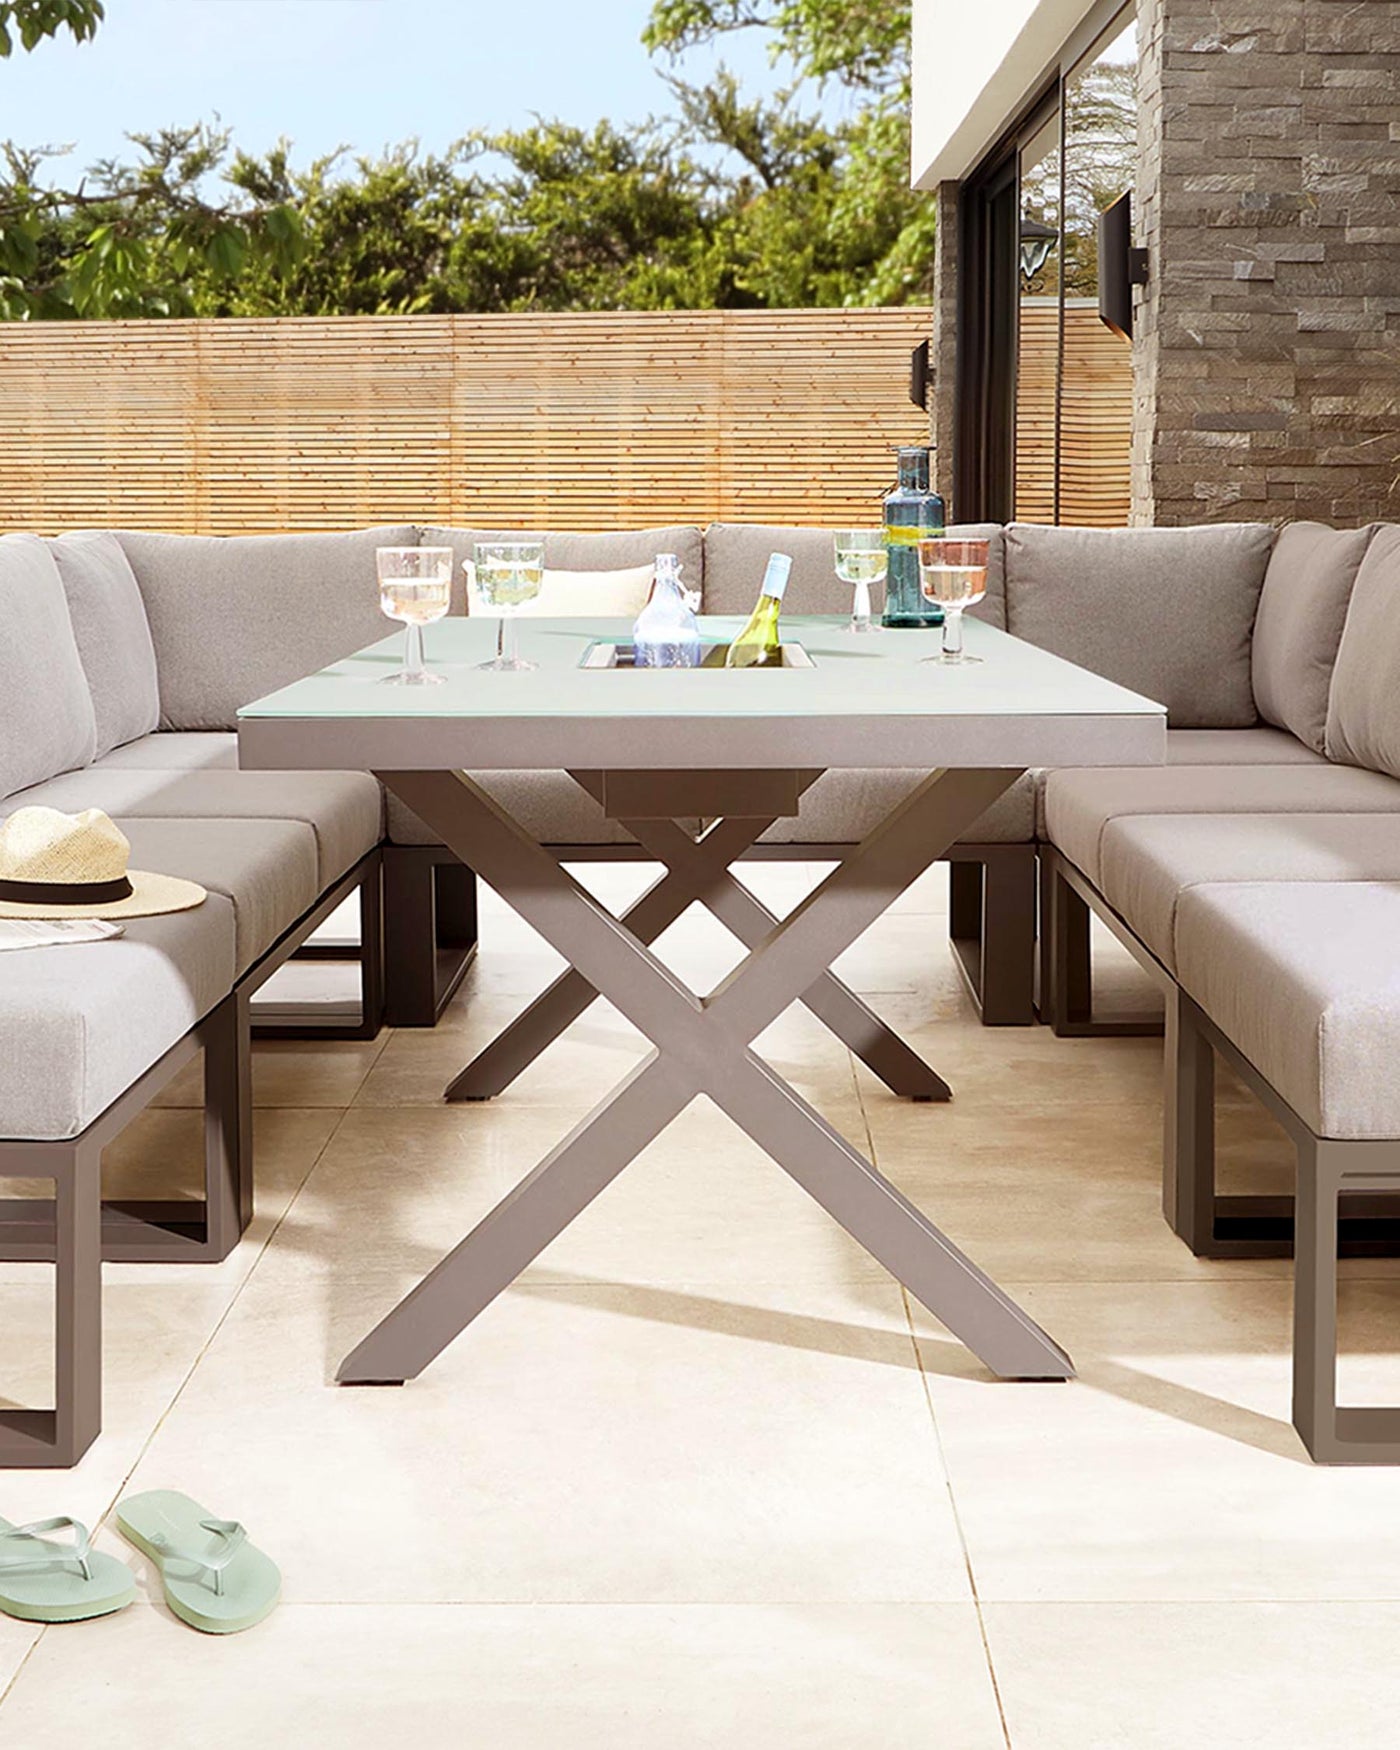 Outdoor patio furniture featuring a modern, rectangular dining table with a frosted glass top and crisscrossing metal legs in a taupe finish. Surrounding the table is an L-shaped sectional sofa with light grey cushions, providing comfortable seating for a relaxed outdoor dining experience. The neutral tones complement a contemporary design aesthetic.